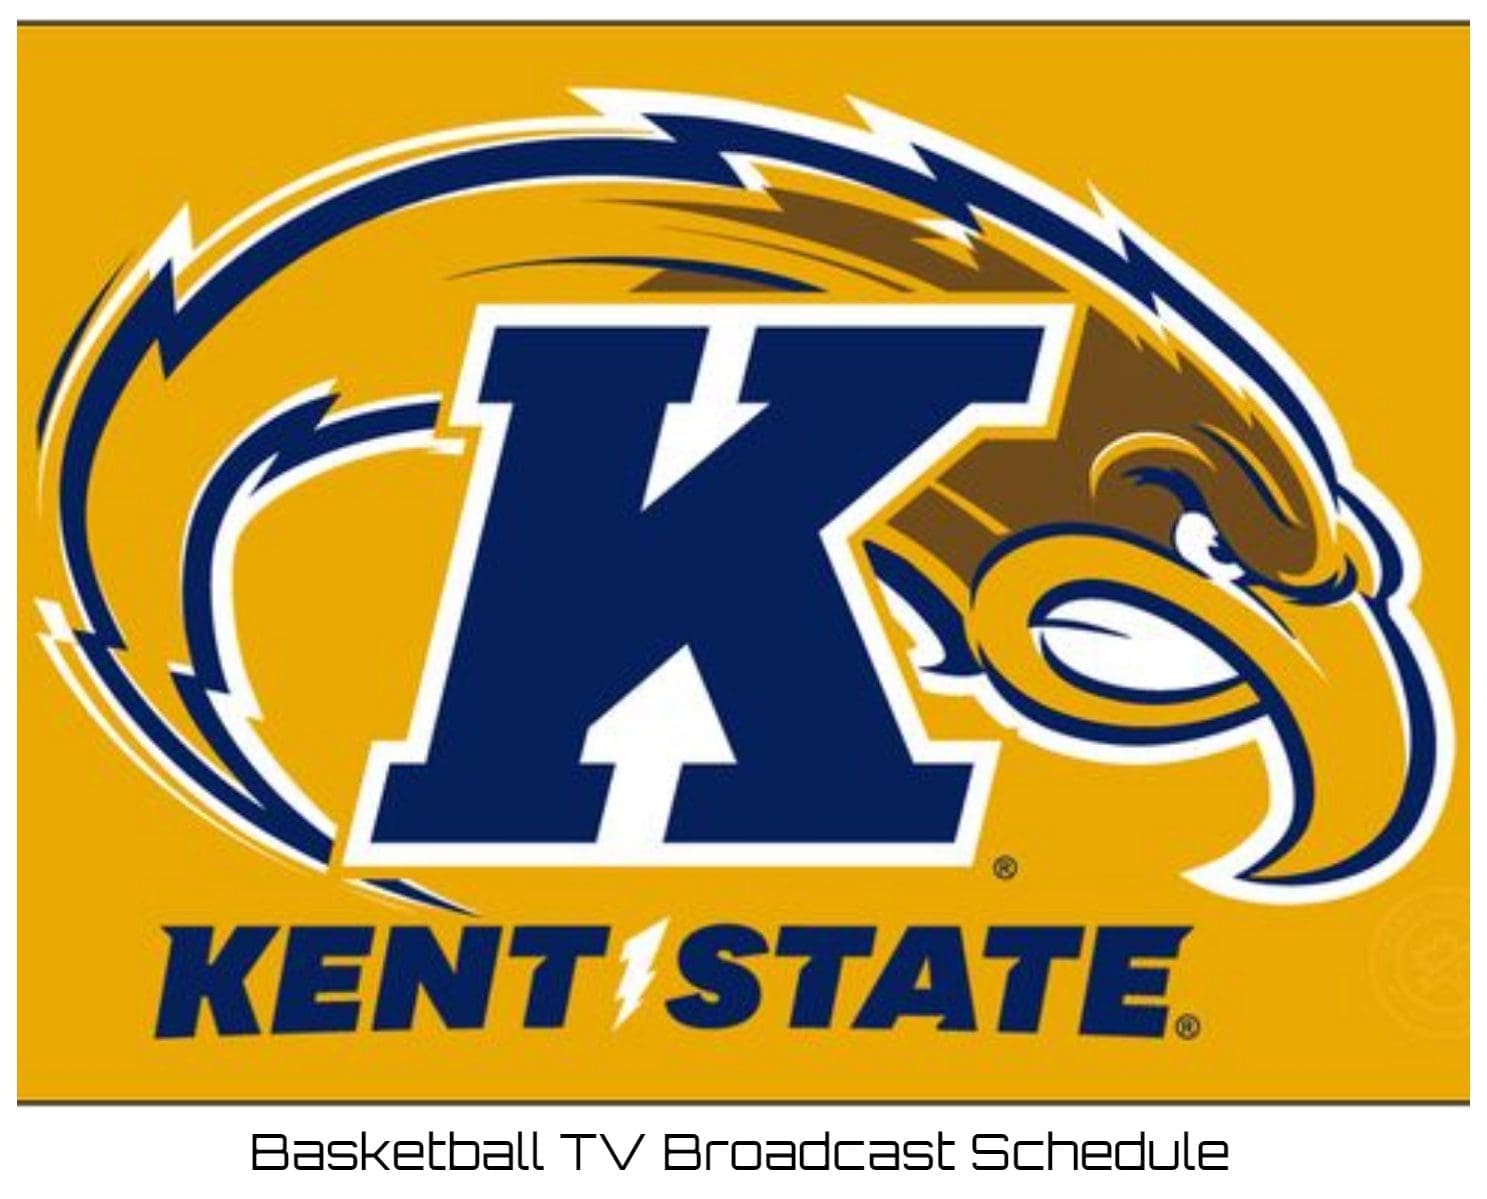 Kent State Golden Flashes Basketball TV Broadcast Schedule